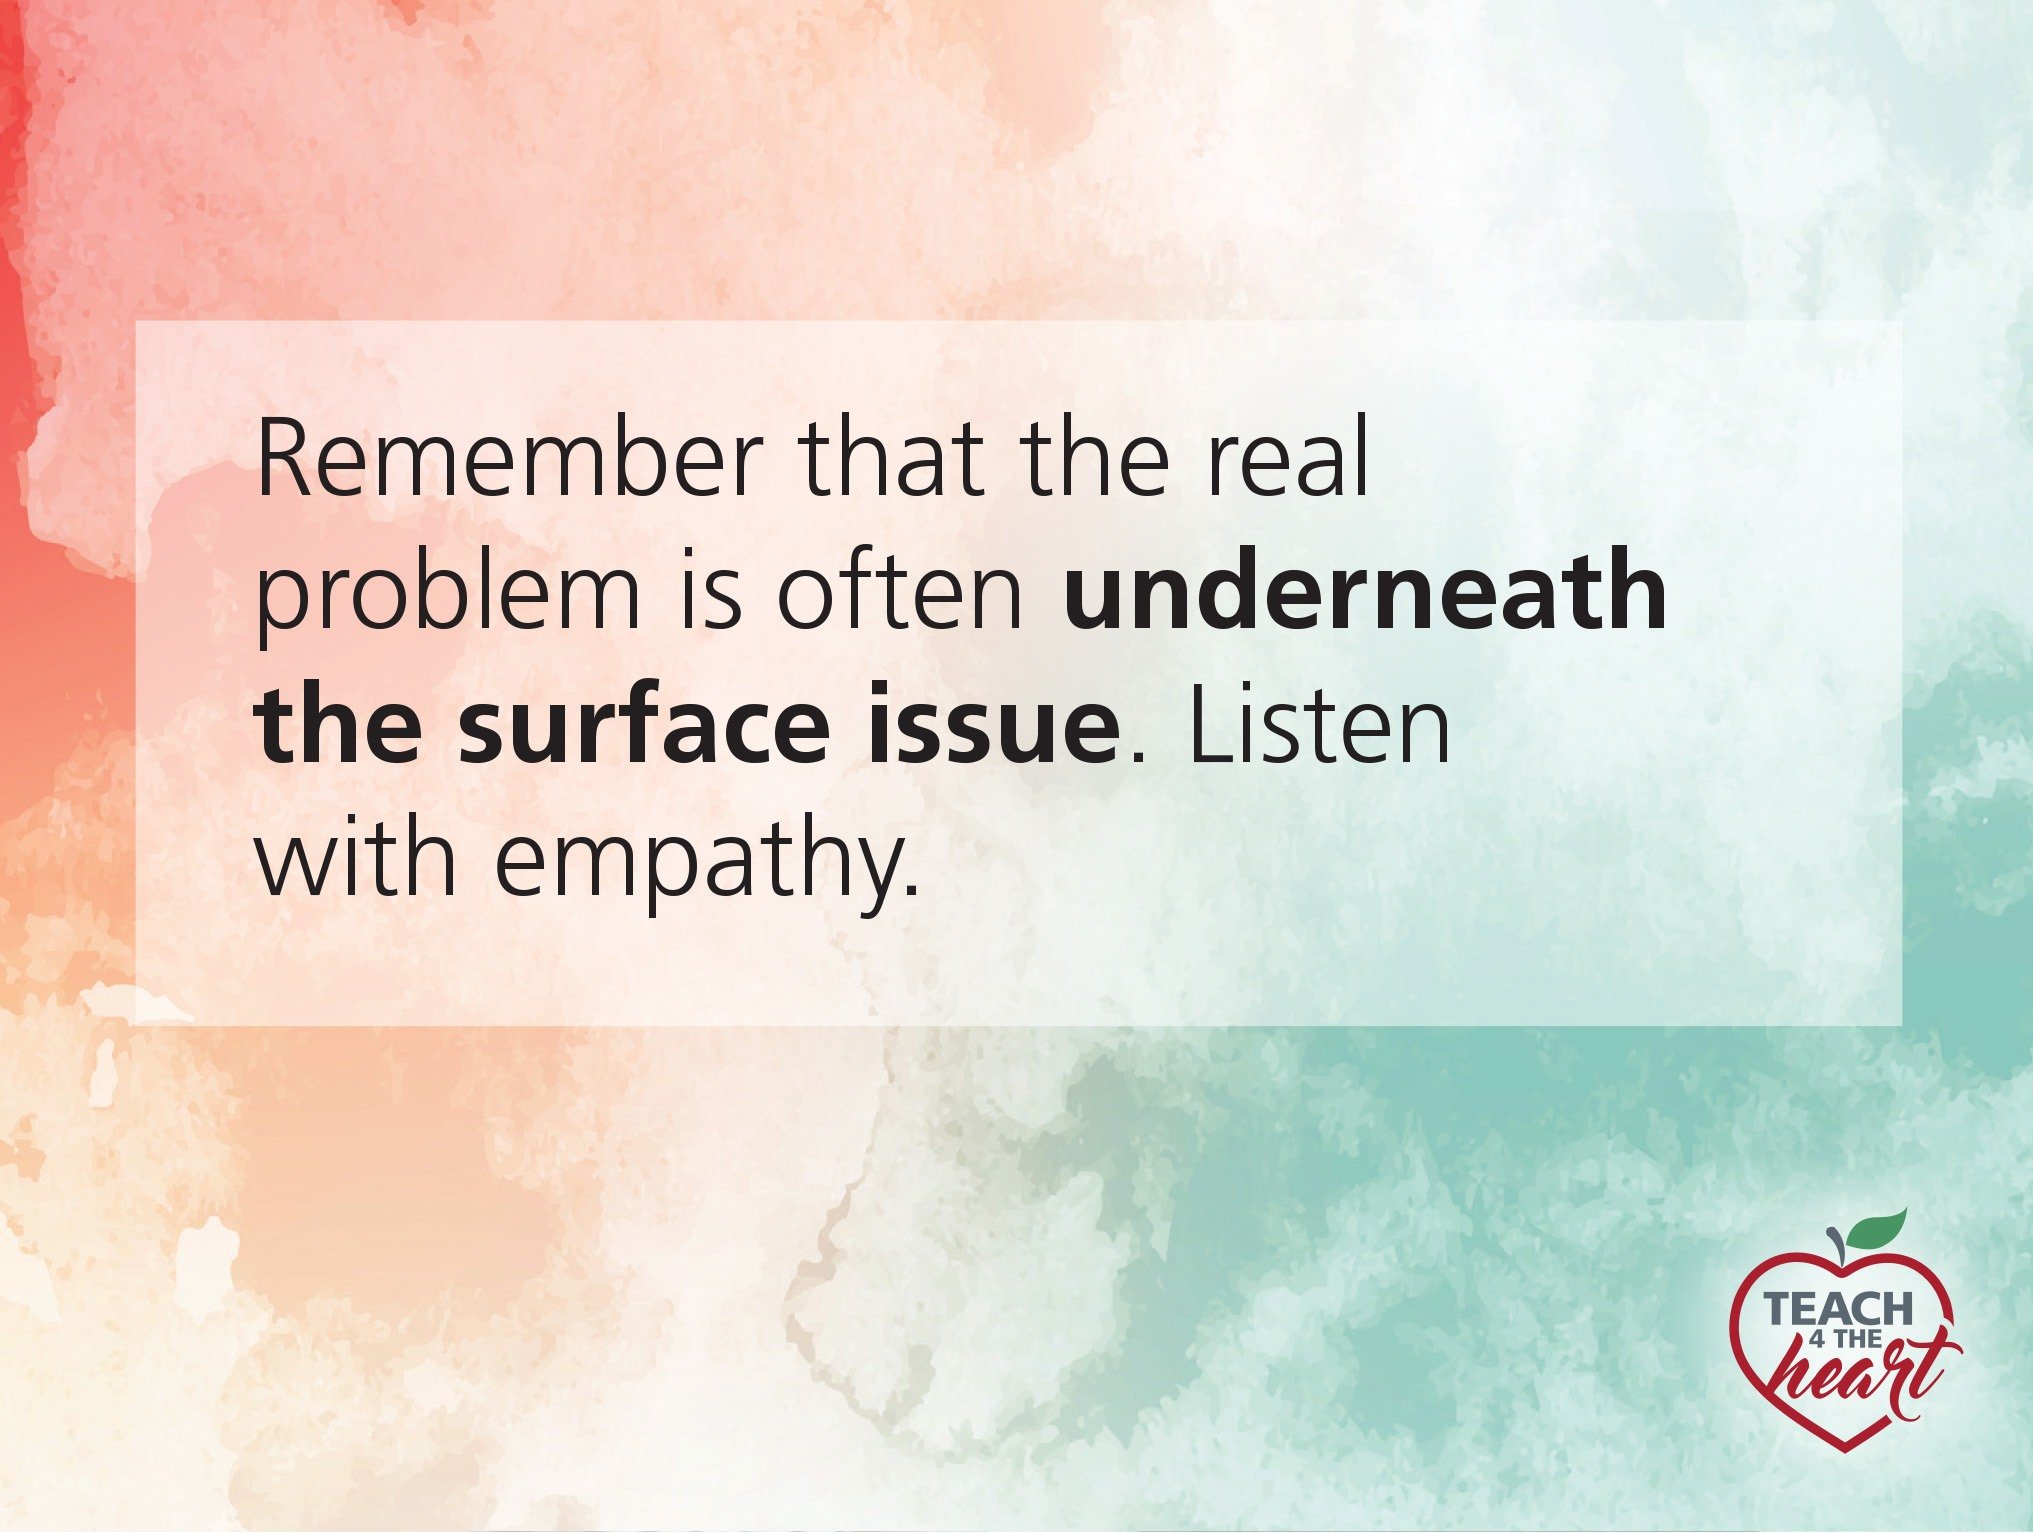 Remember the real problem is often underneath the surface issue. Listen with empathy.